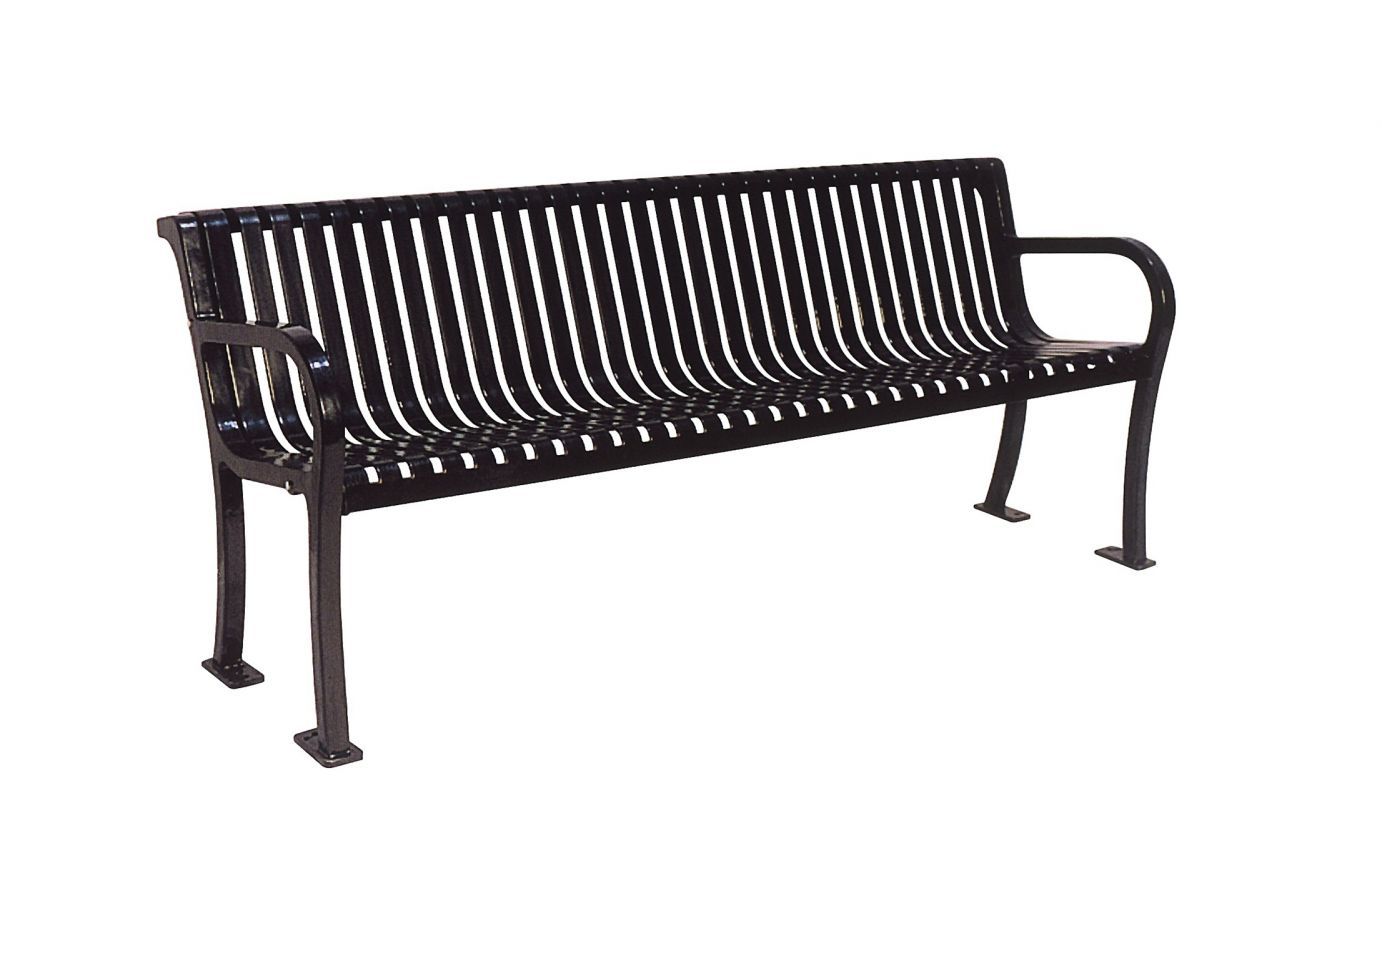 Lexington Perforated Bench with Back | WillyGoat Playground & Park Equipment